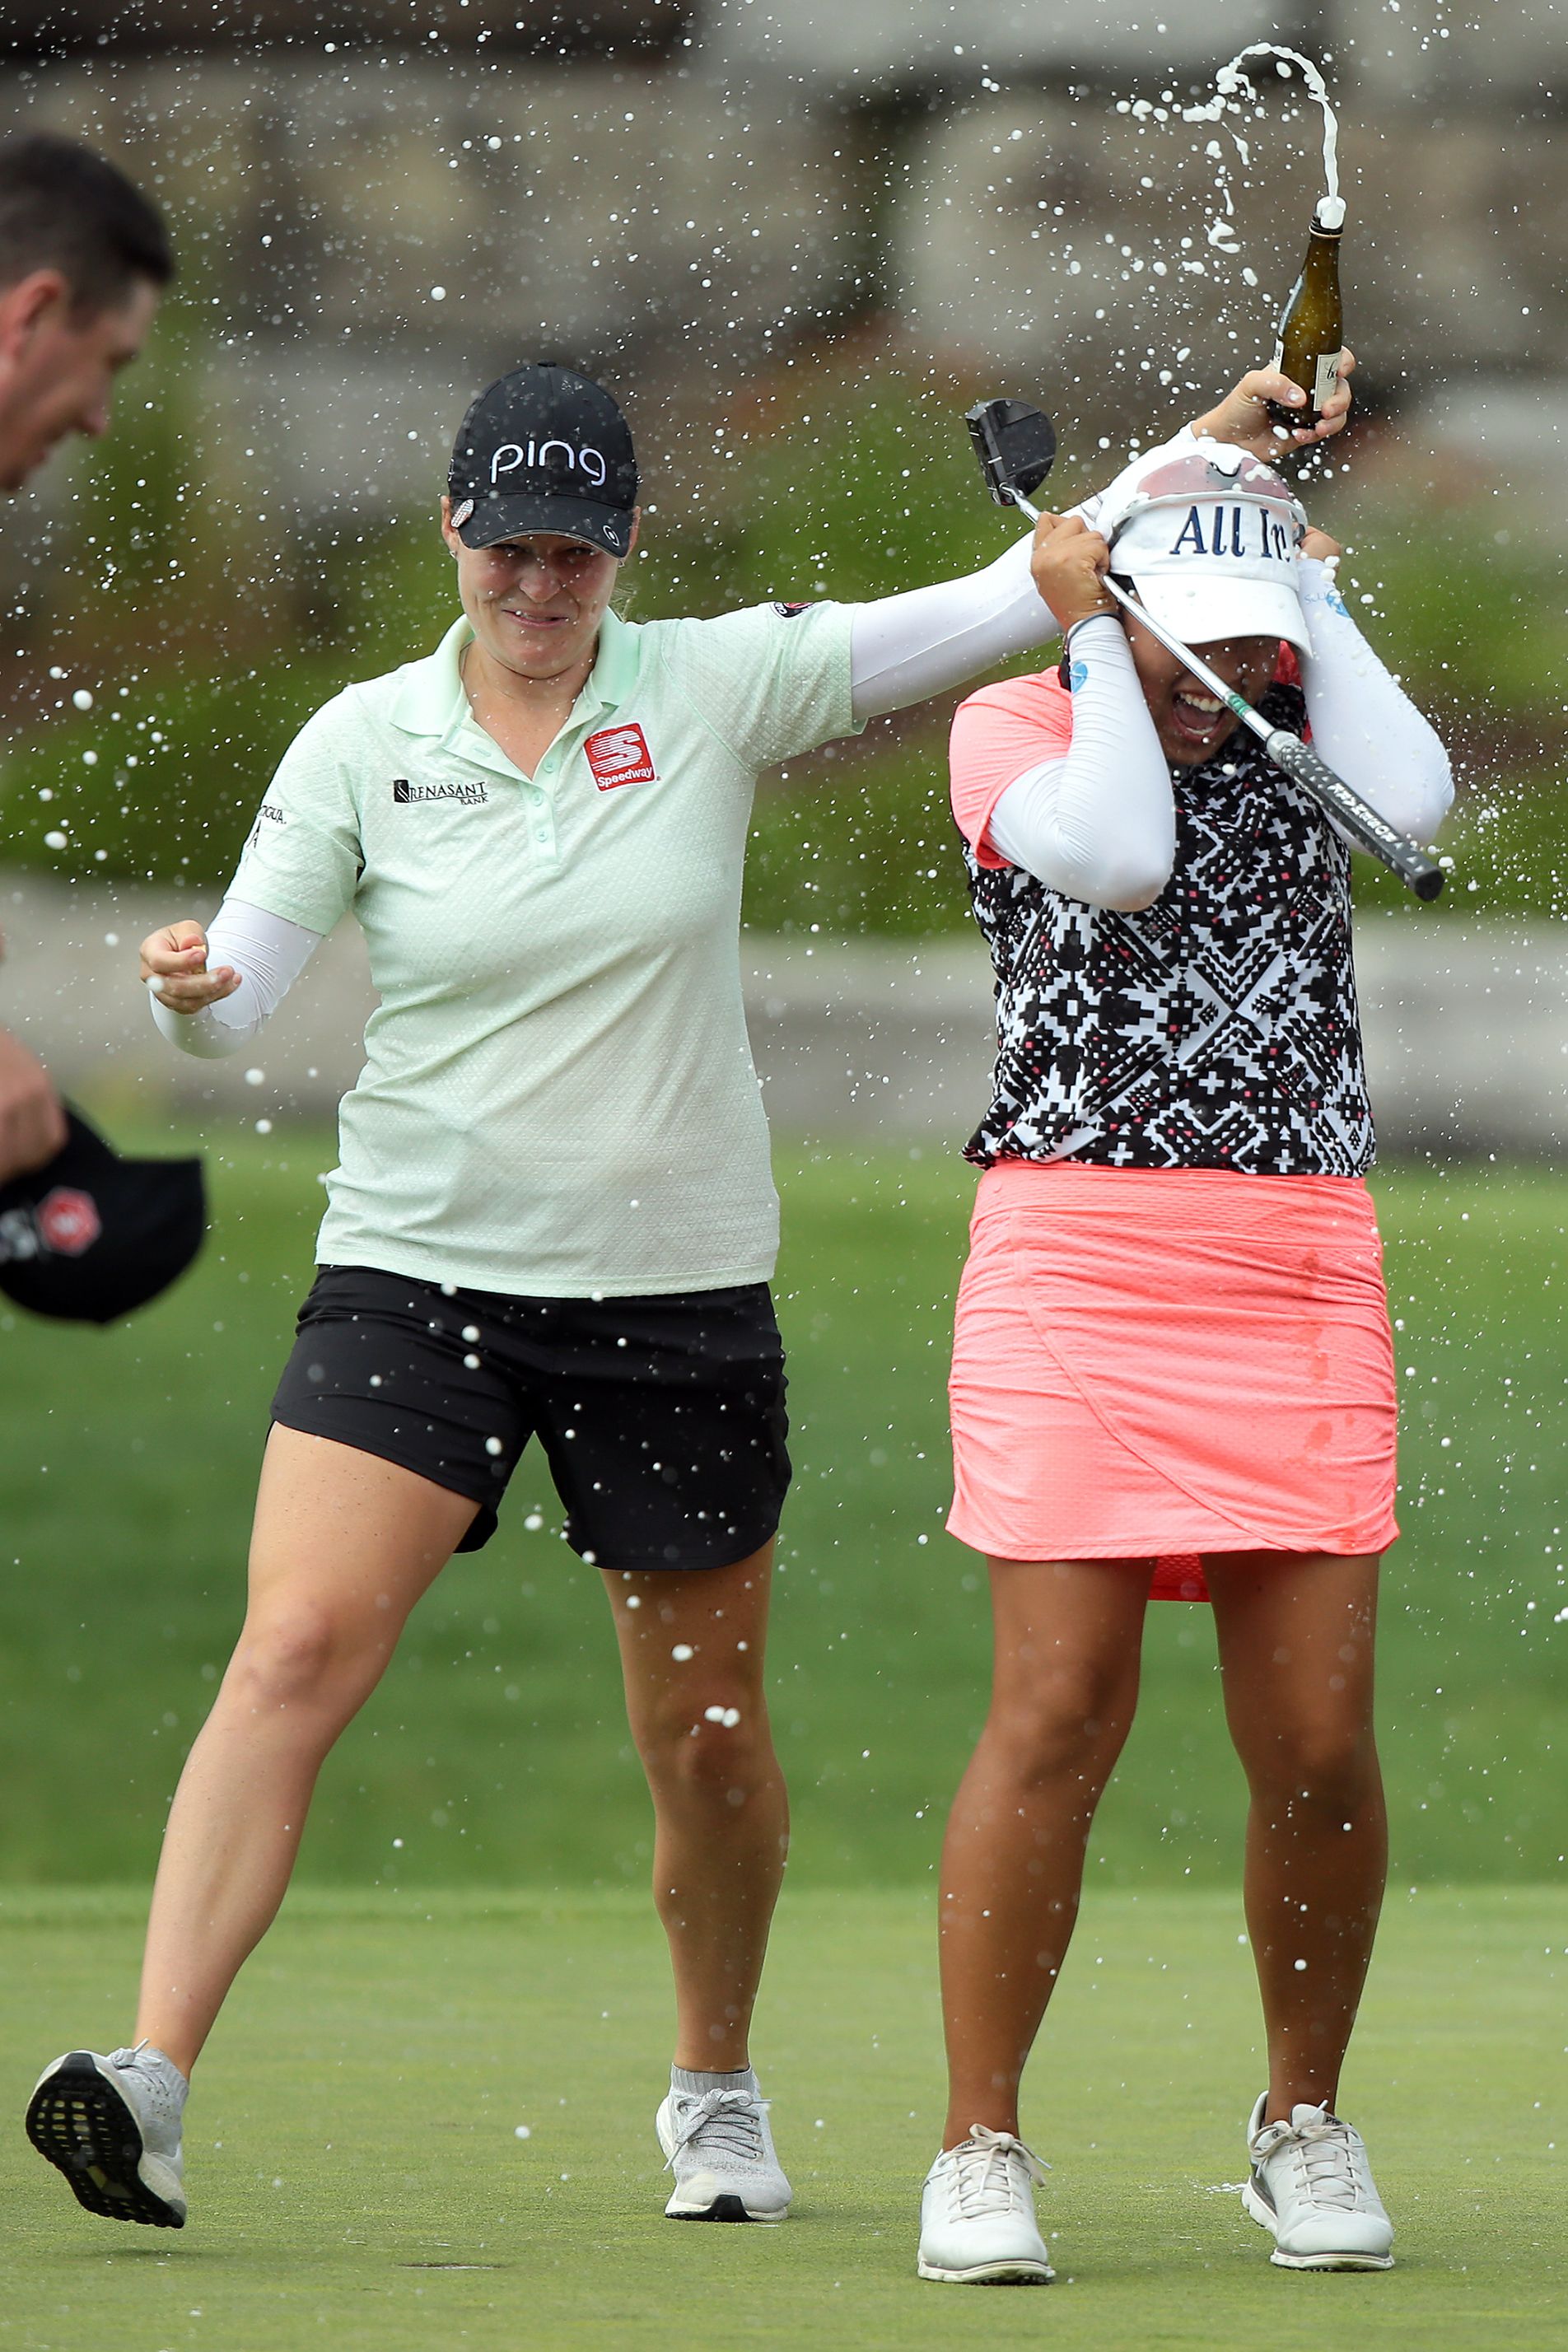 Ally McDonald (left) pours a drink on Jasmine Suwannapura of Thailand after winning the Dow Great Lakes Bay Invitational at Midland Country Clubin Midland, Michigan, on Saturday.